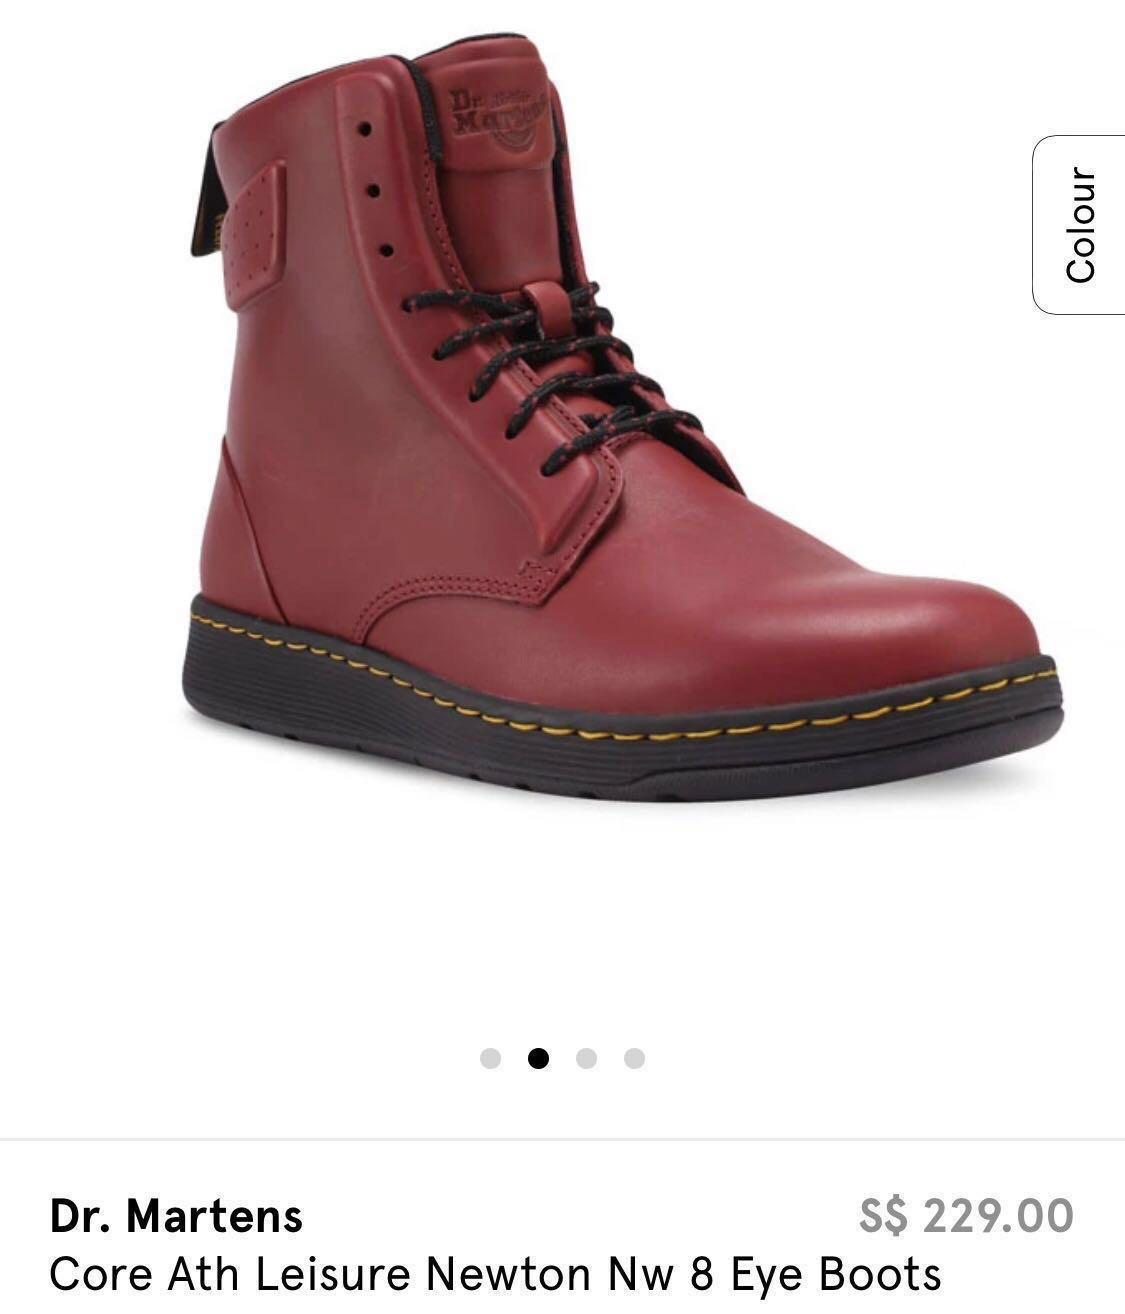 Dr Martens Core Ath Leisure Newton Nw 8 